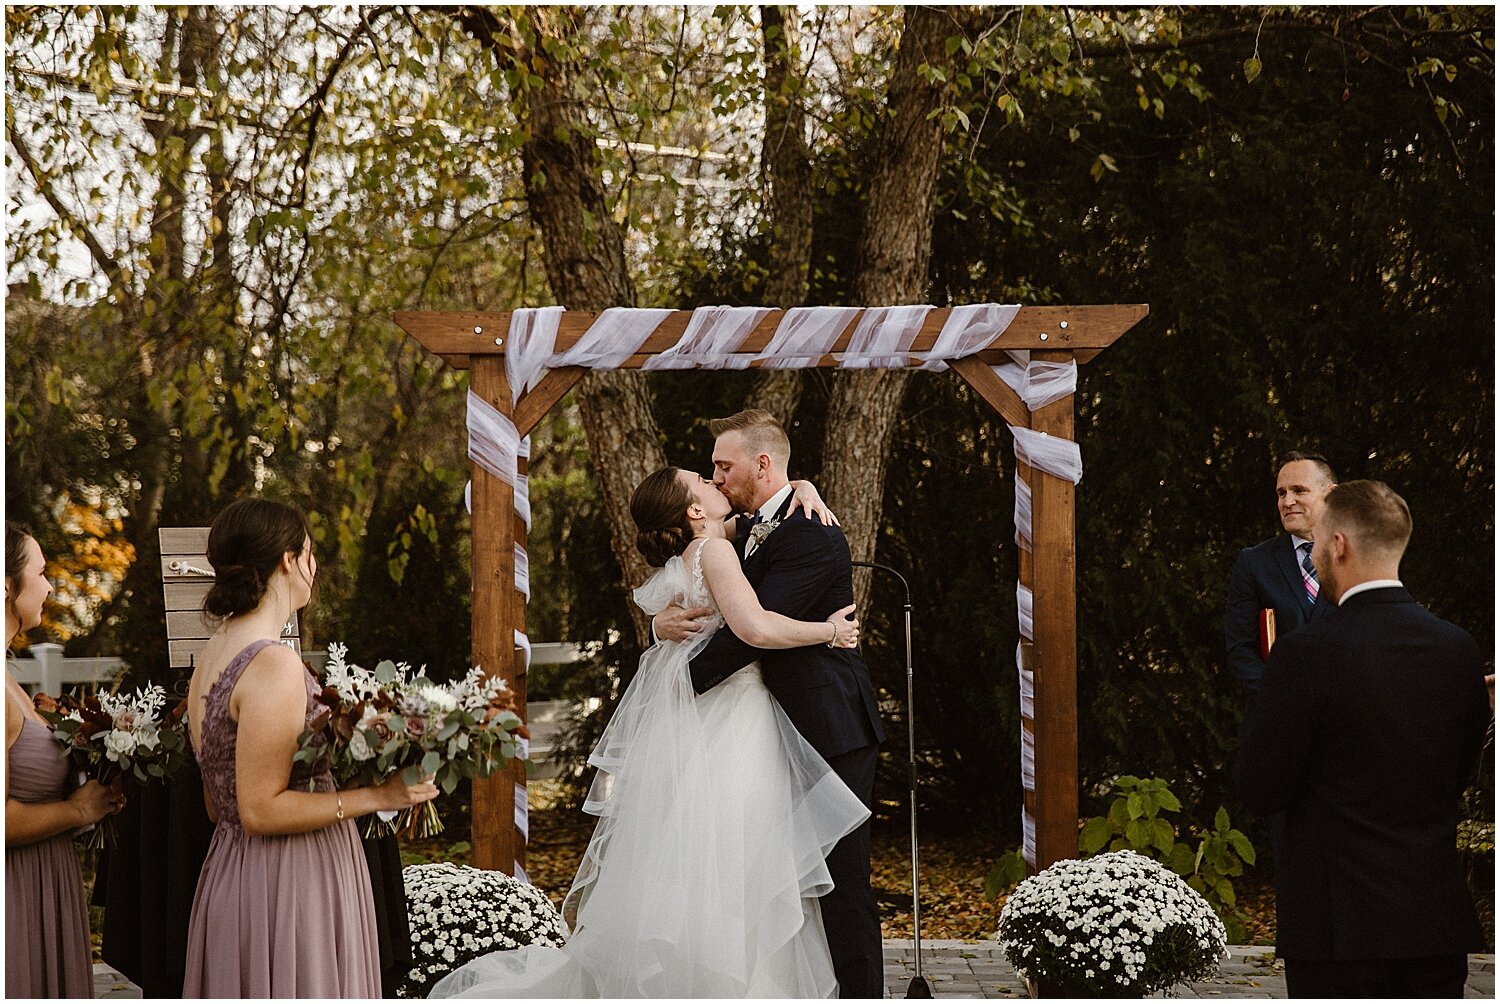  bride and groom say I do at their outdoor wedding ceremony 